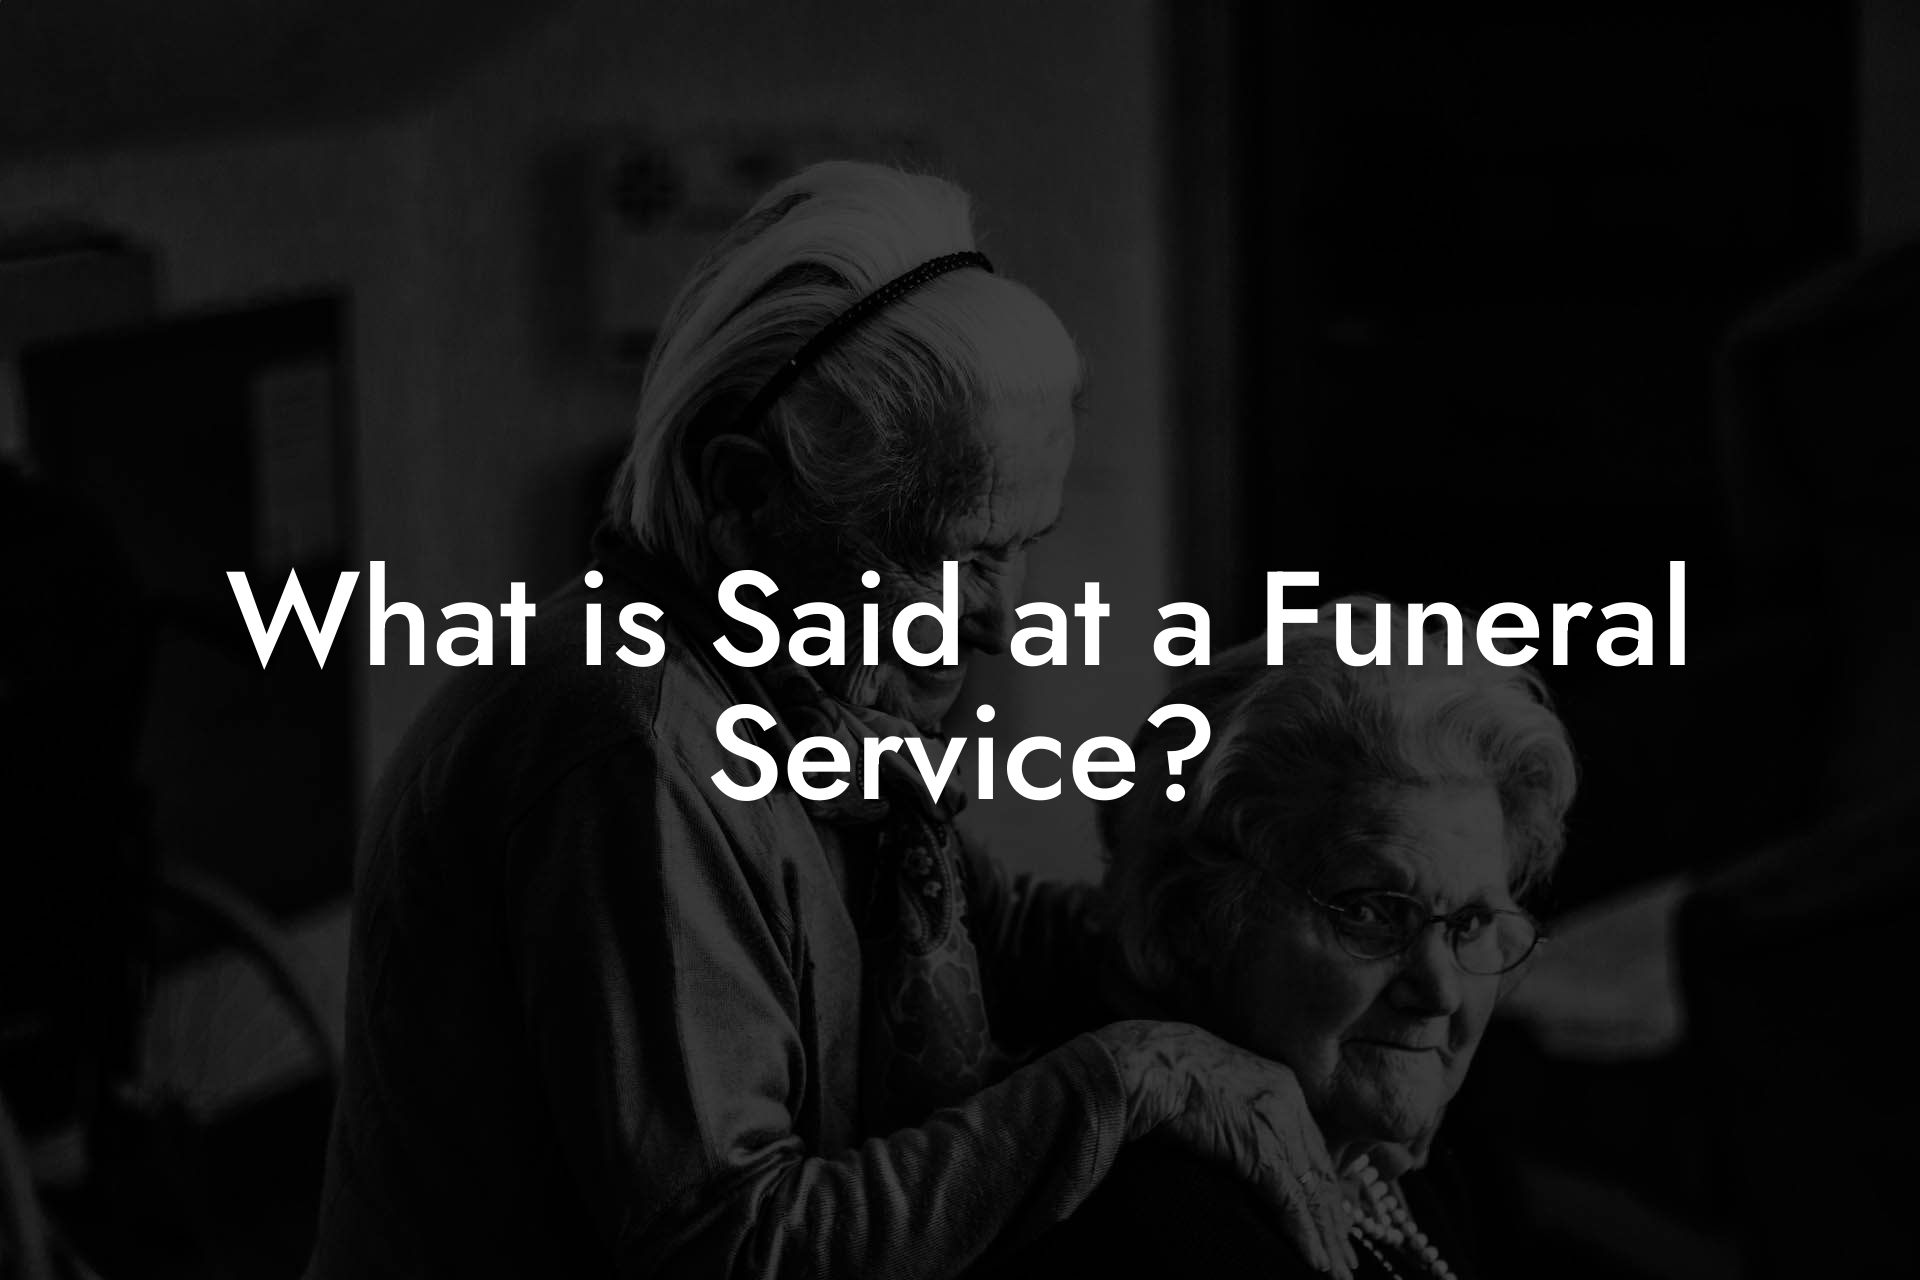 What is Said at a Funeral Service?